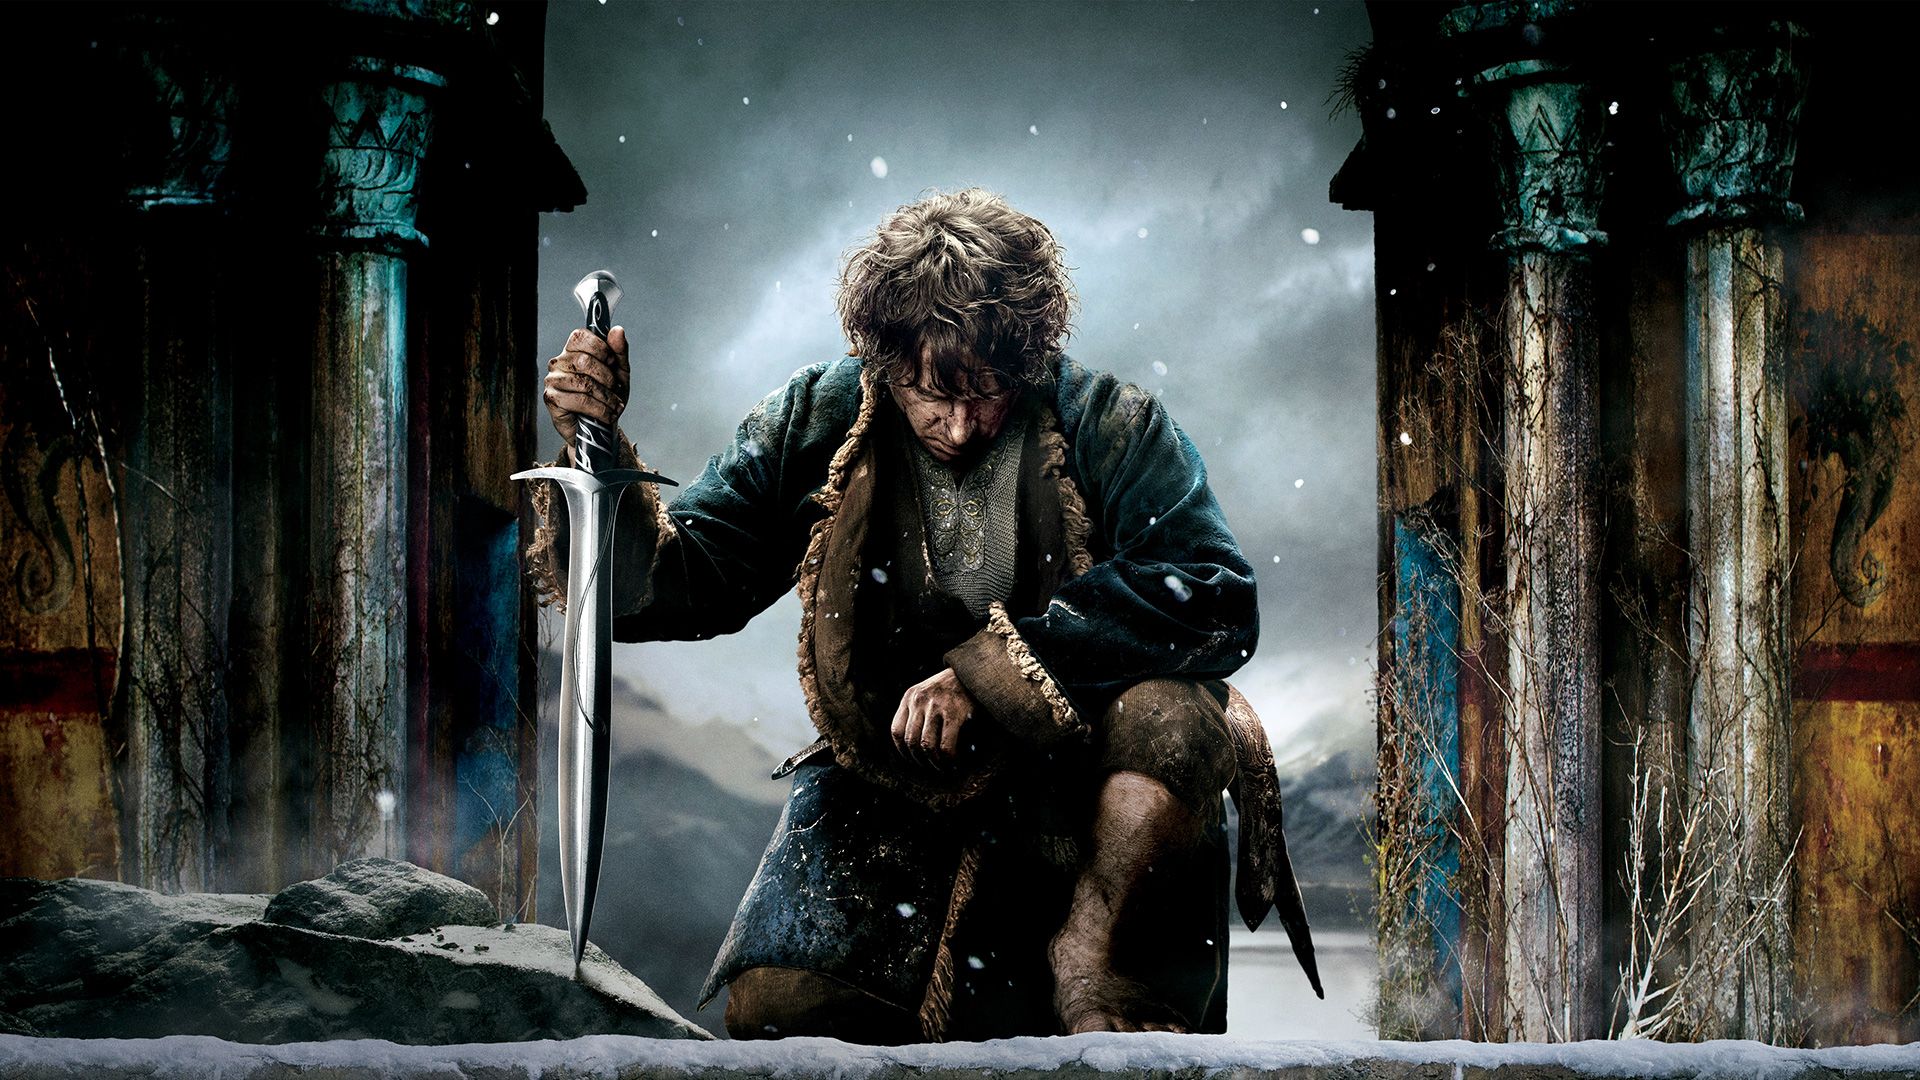 The Hobbit: The Battle of the Five Armies background